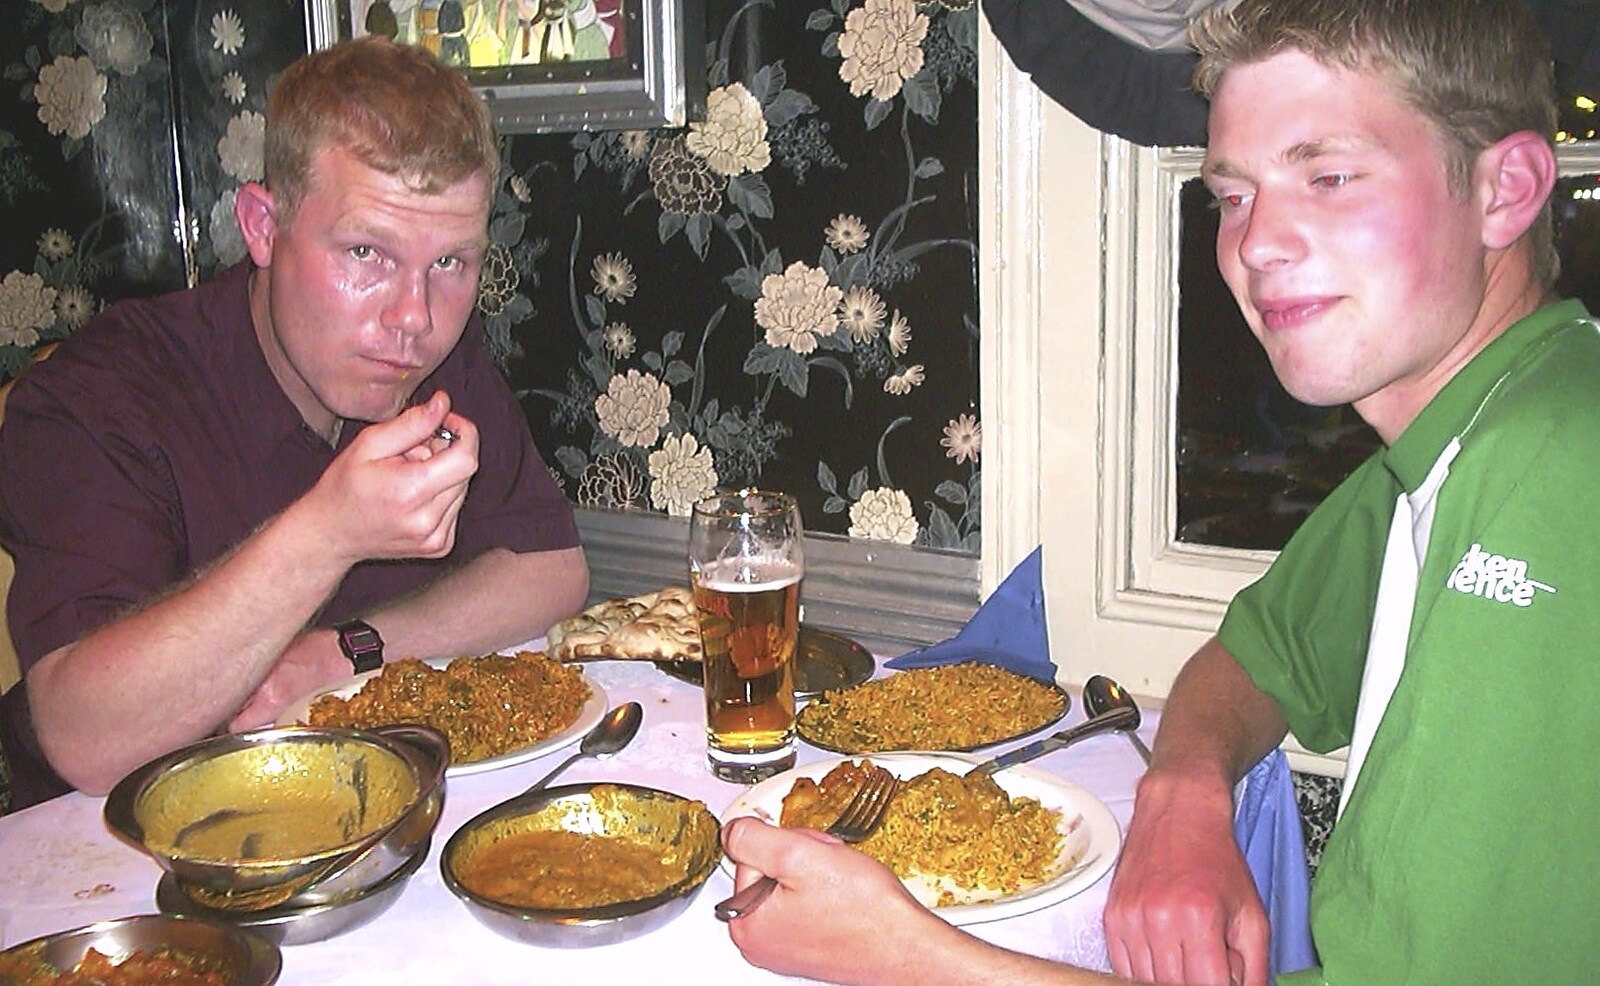 A Trip to Alton Towers, Staffordshire - 19th June 2004: Mikey P's looking hot in the Maharaja